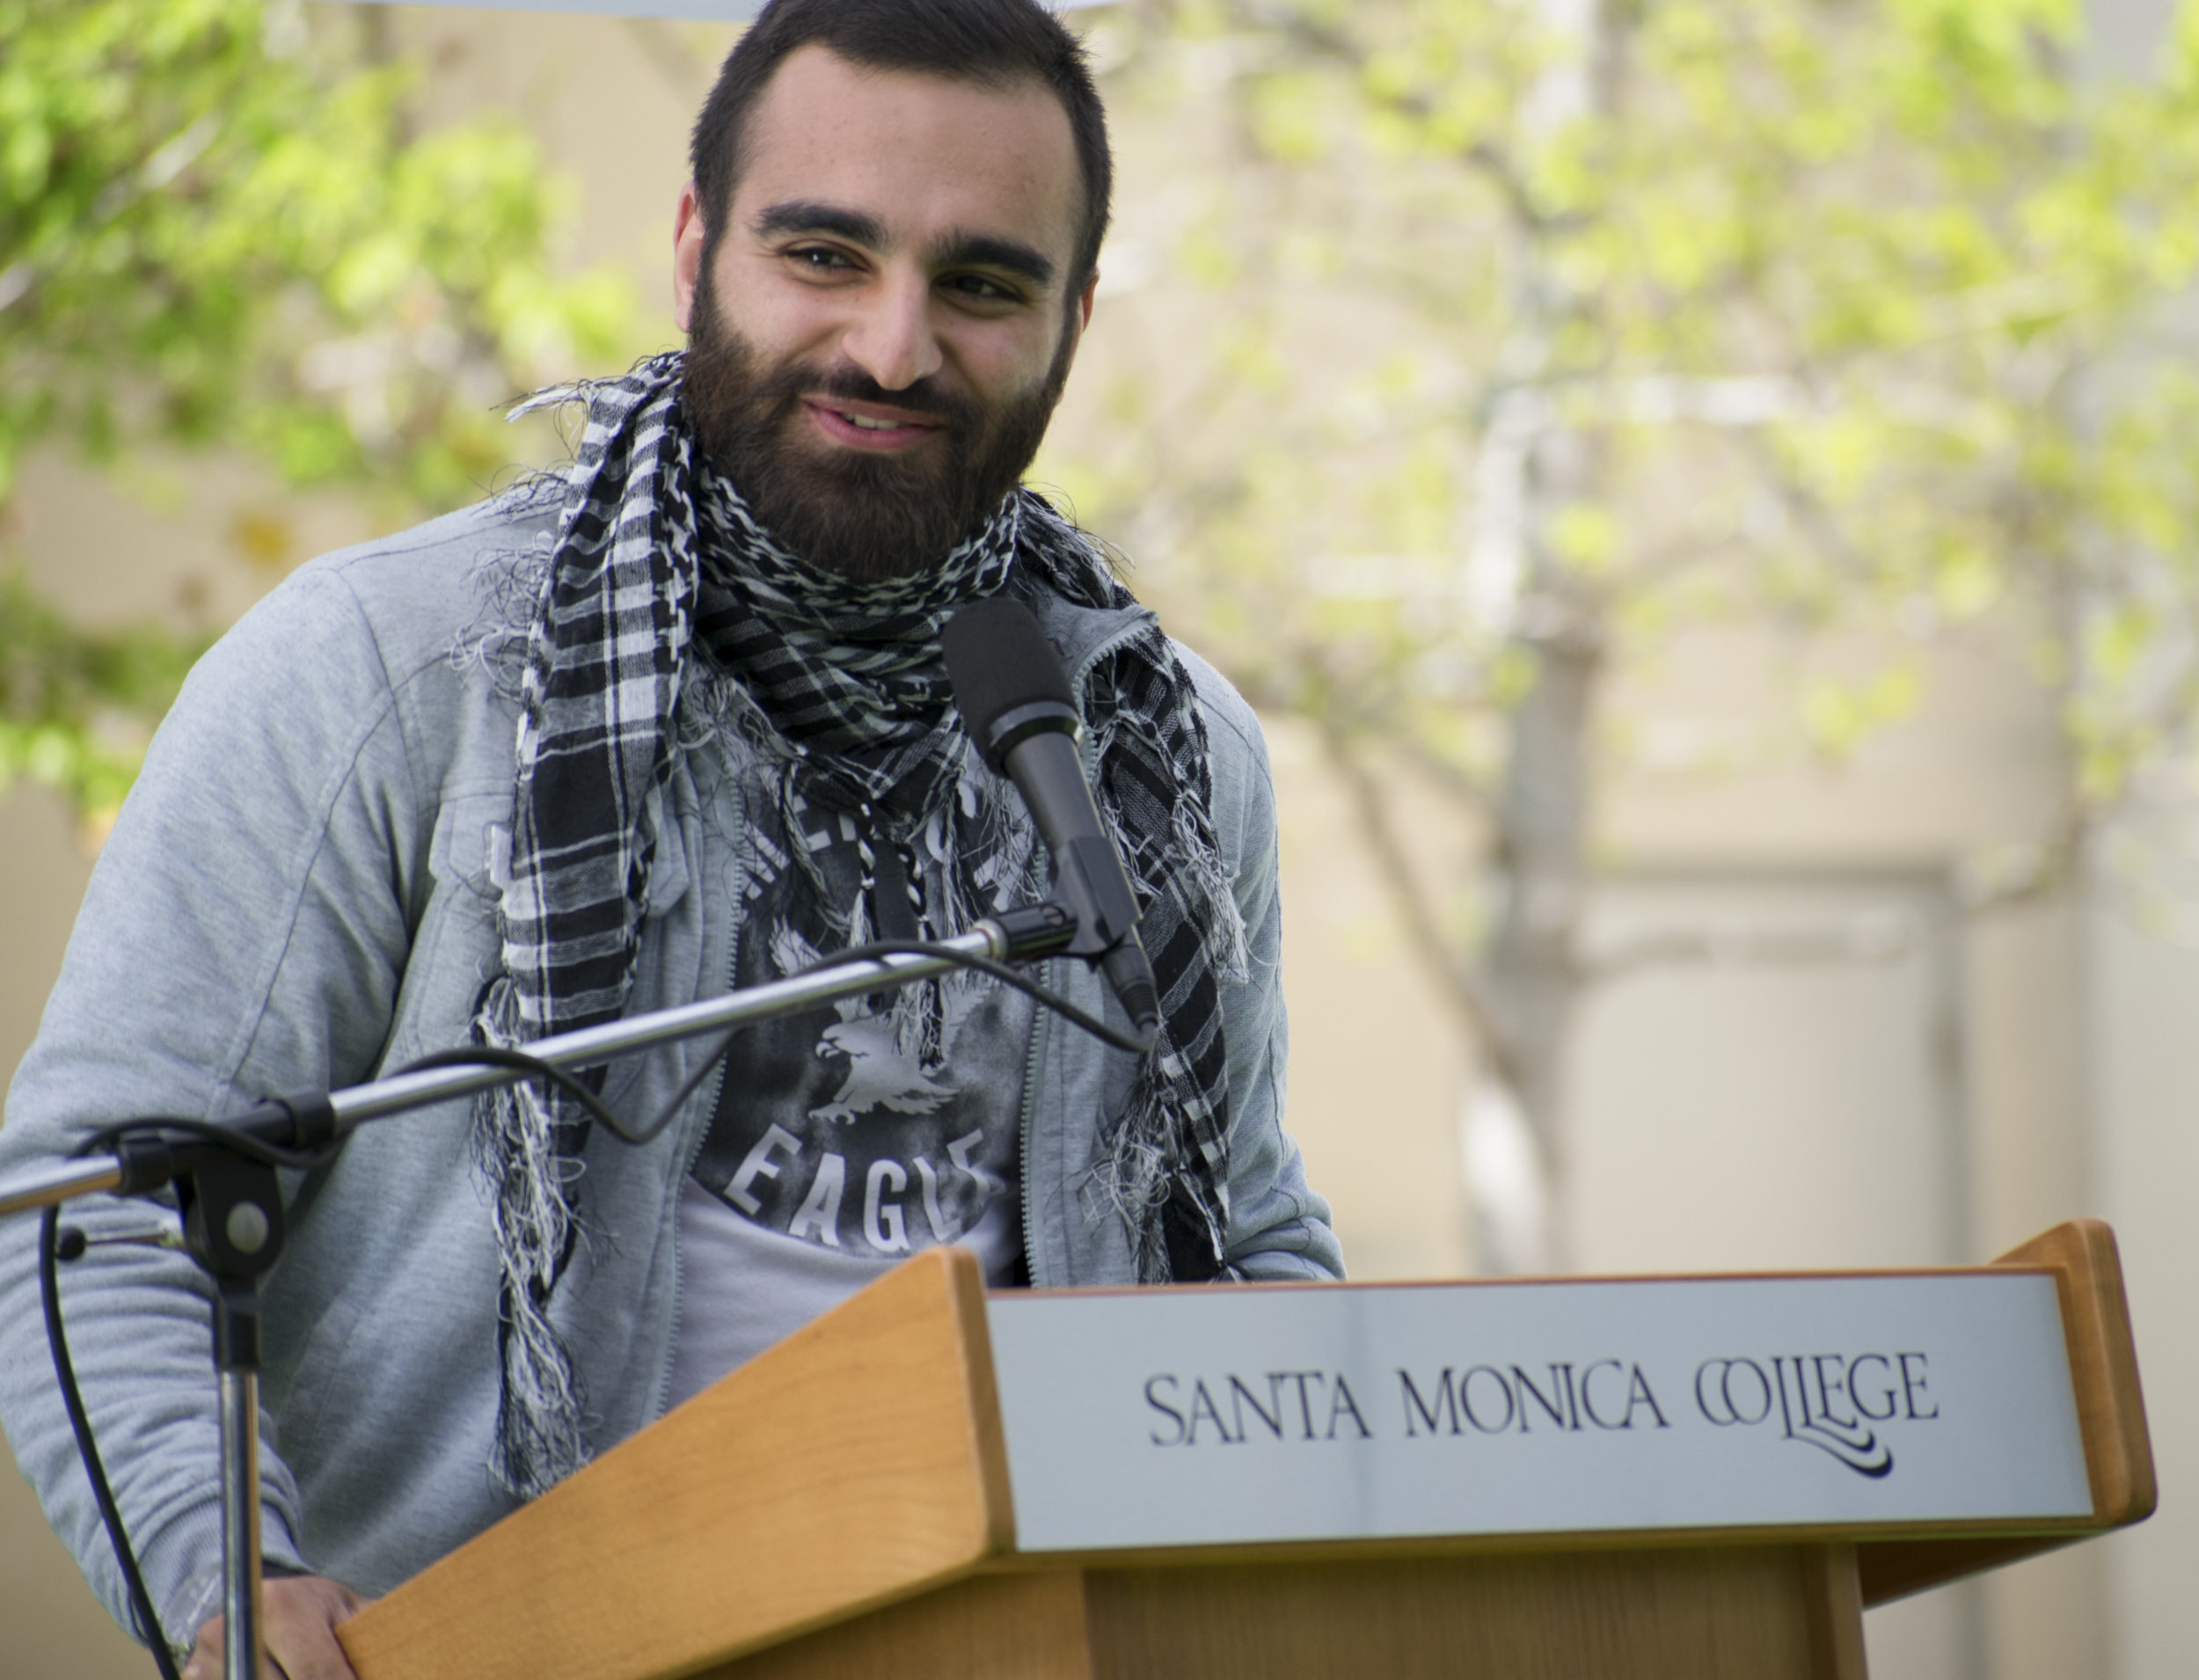  Hesham Jarmakani, a candidate for the position of vice president on the Associated Students of Santa Monica College board introduces himself during a forum to give candidates running for the election a platform on April 3 in Santa Monica, California